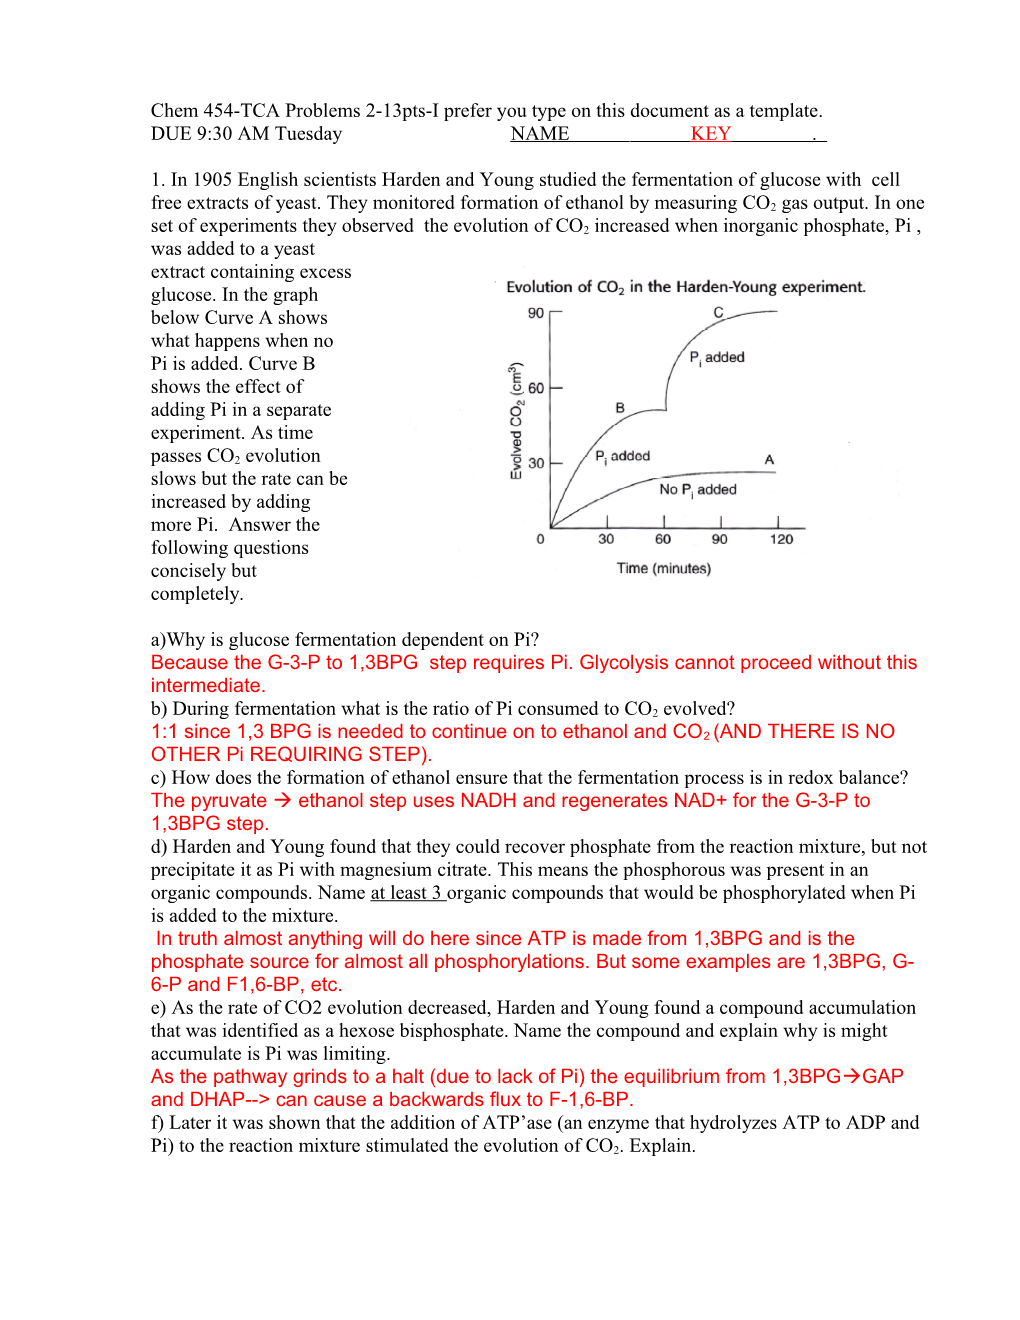 Chem 454-TCA Problems 2-13Pts-I Prefer You Type on This Document As a Template